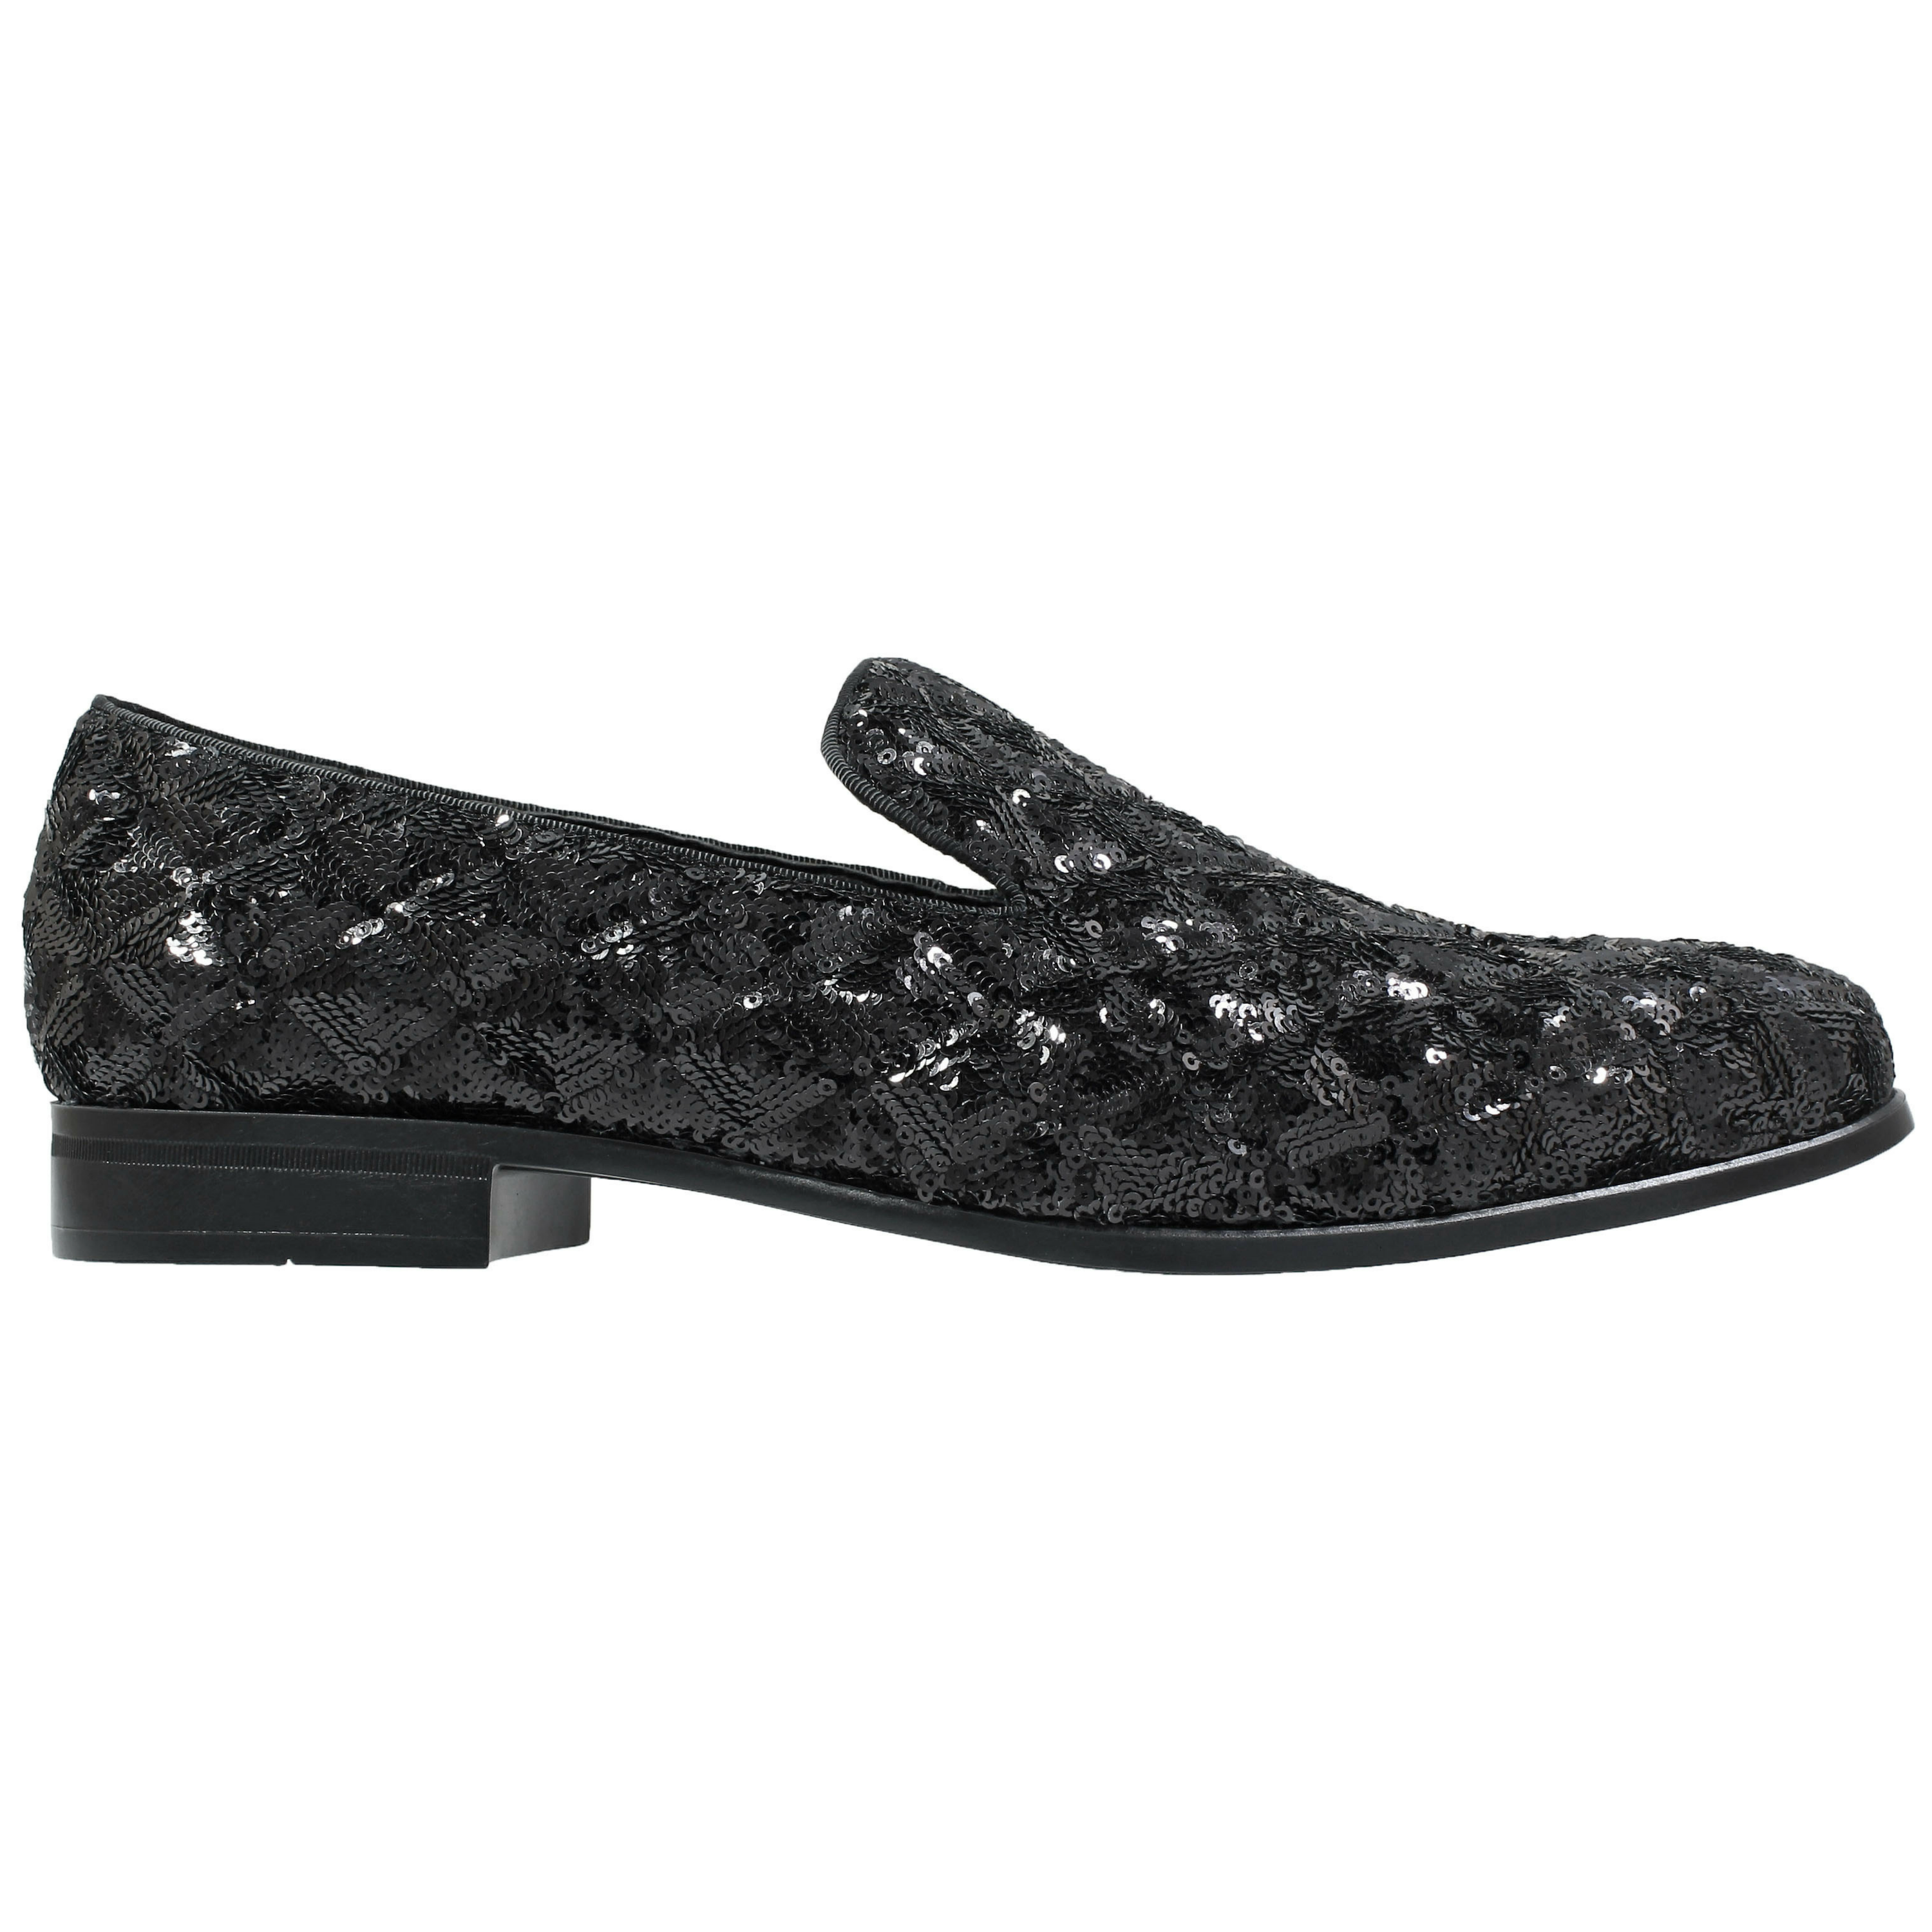 STACY ADAMS BLACK SEQUINED FORMAL 